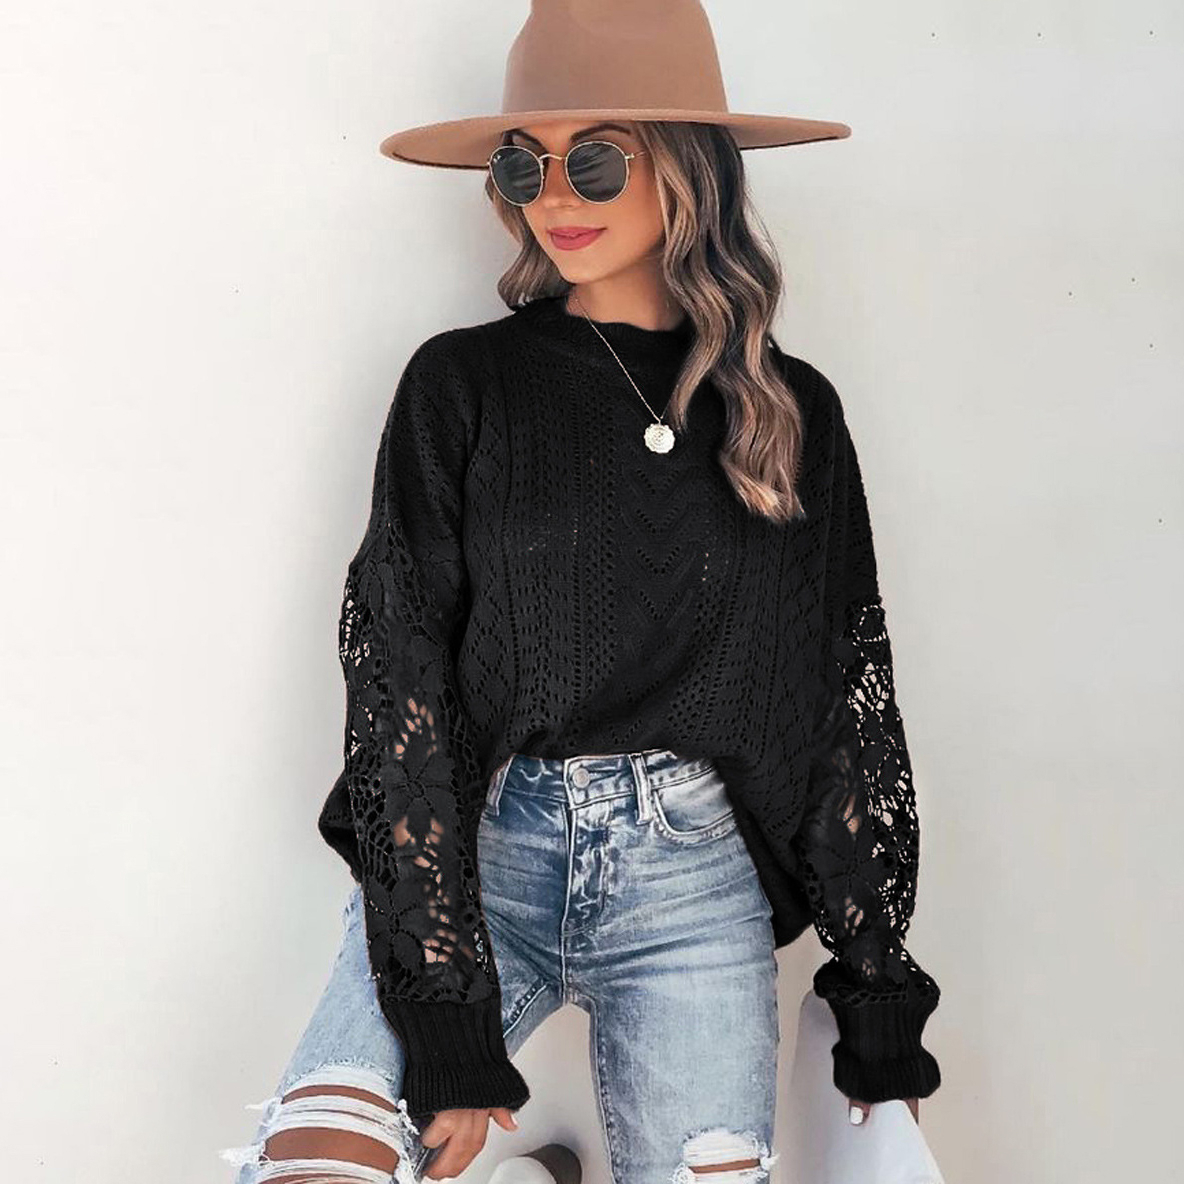 Lace Eyelet Knit Sweater, Casual Crew Neck Long Sleeve Sweater, Women's Clothing - Black, S